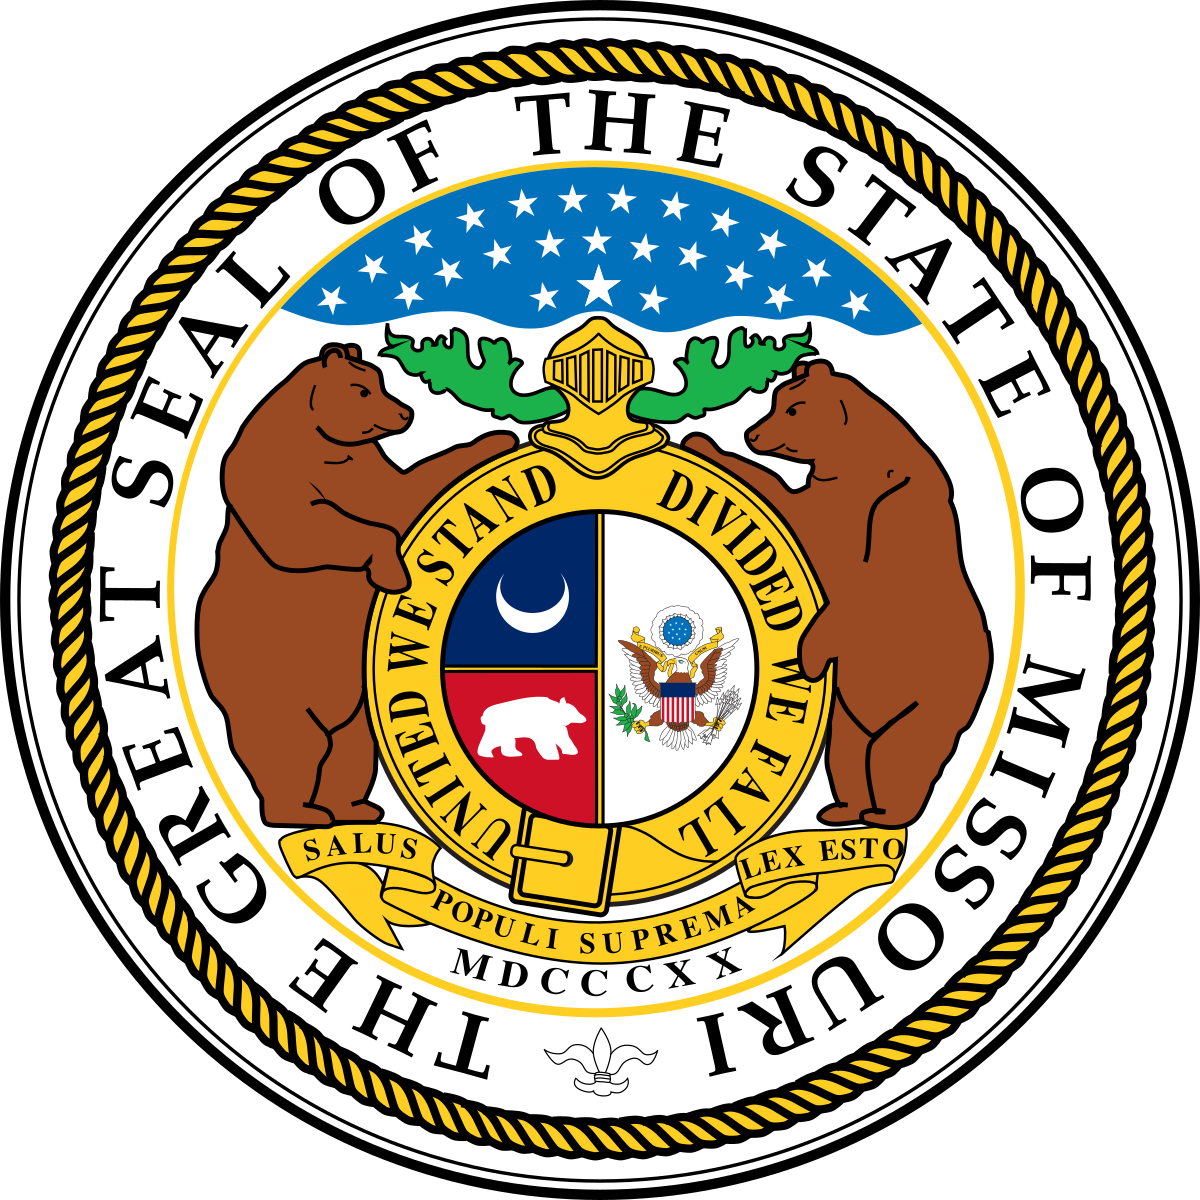 Jury clipart missouri compromise. United states house of